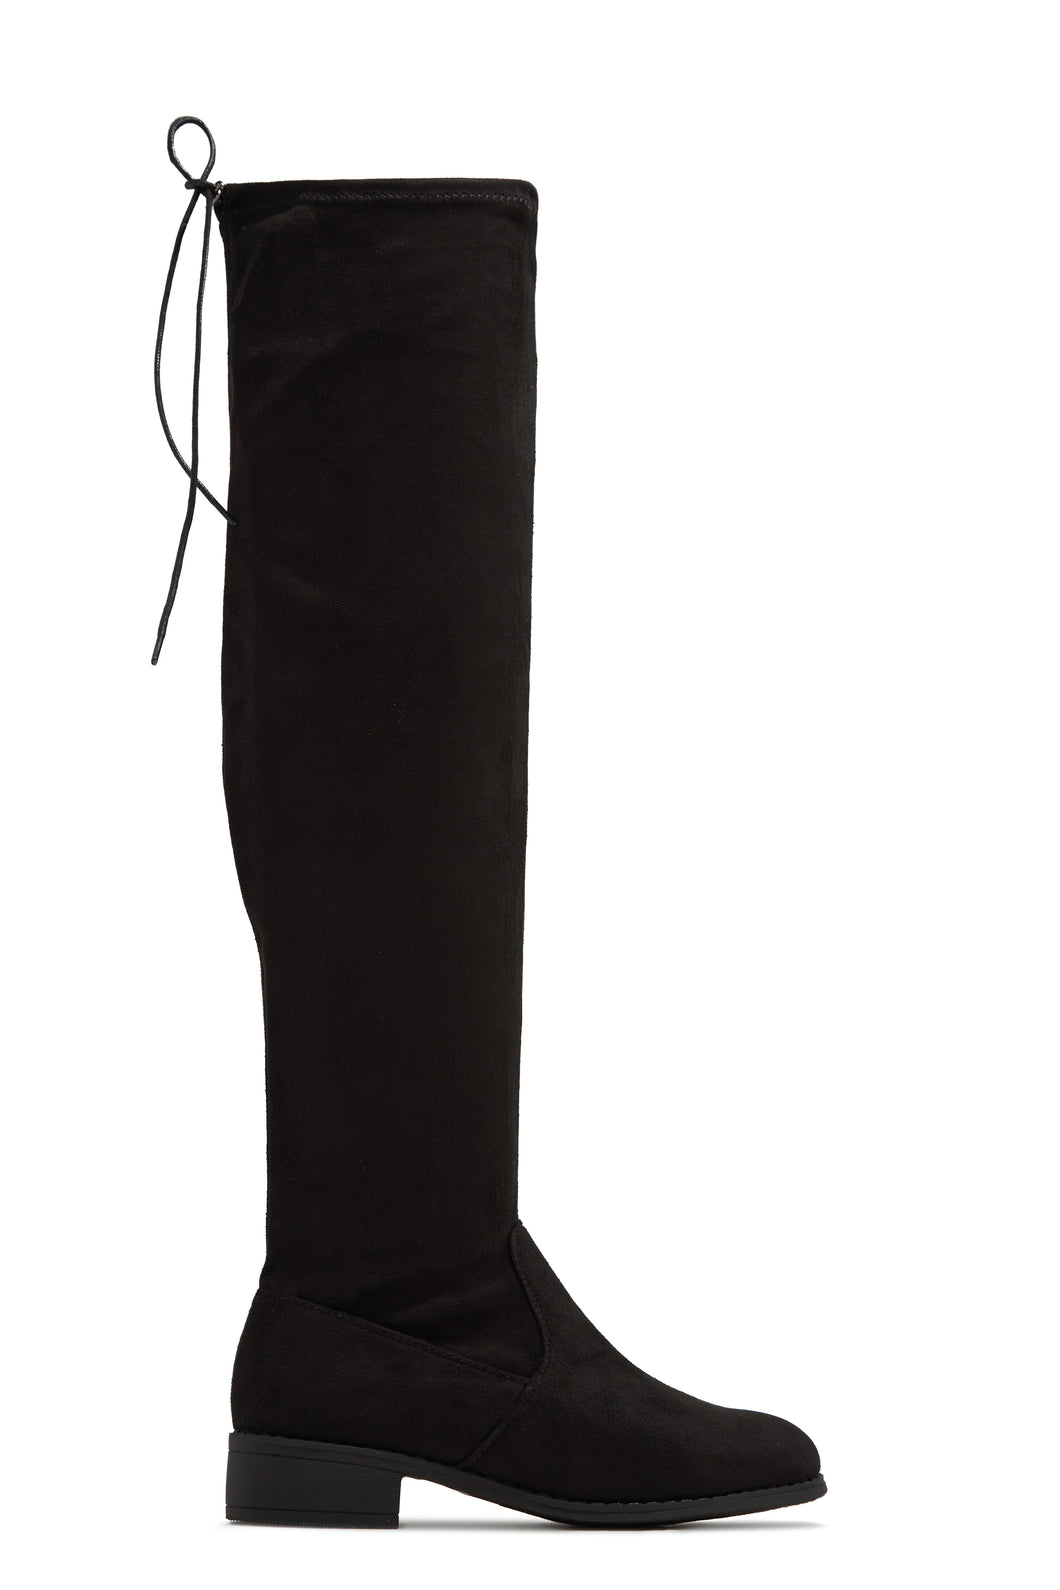 High & Low Over The Knee Flat Boots - Black